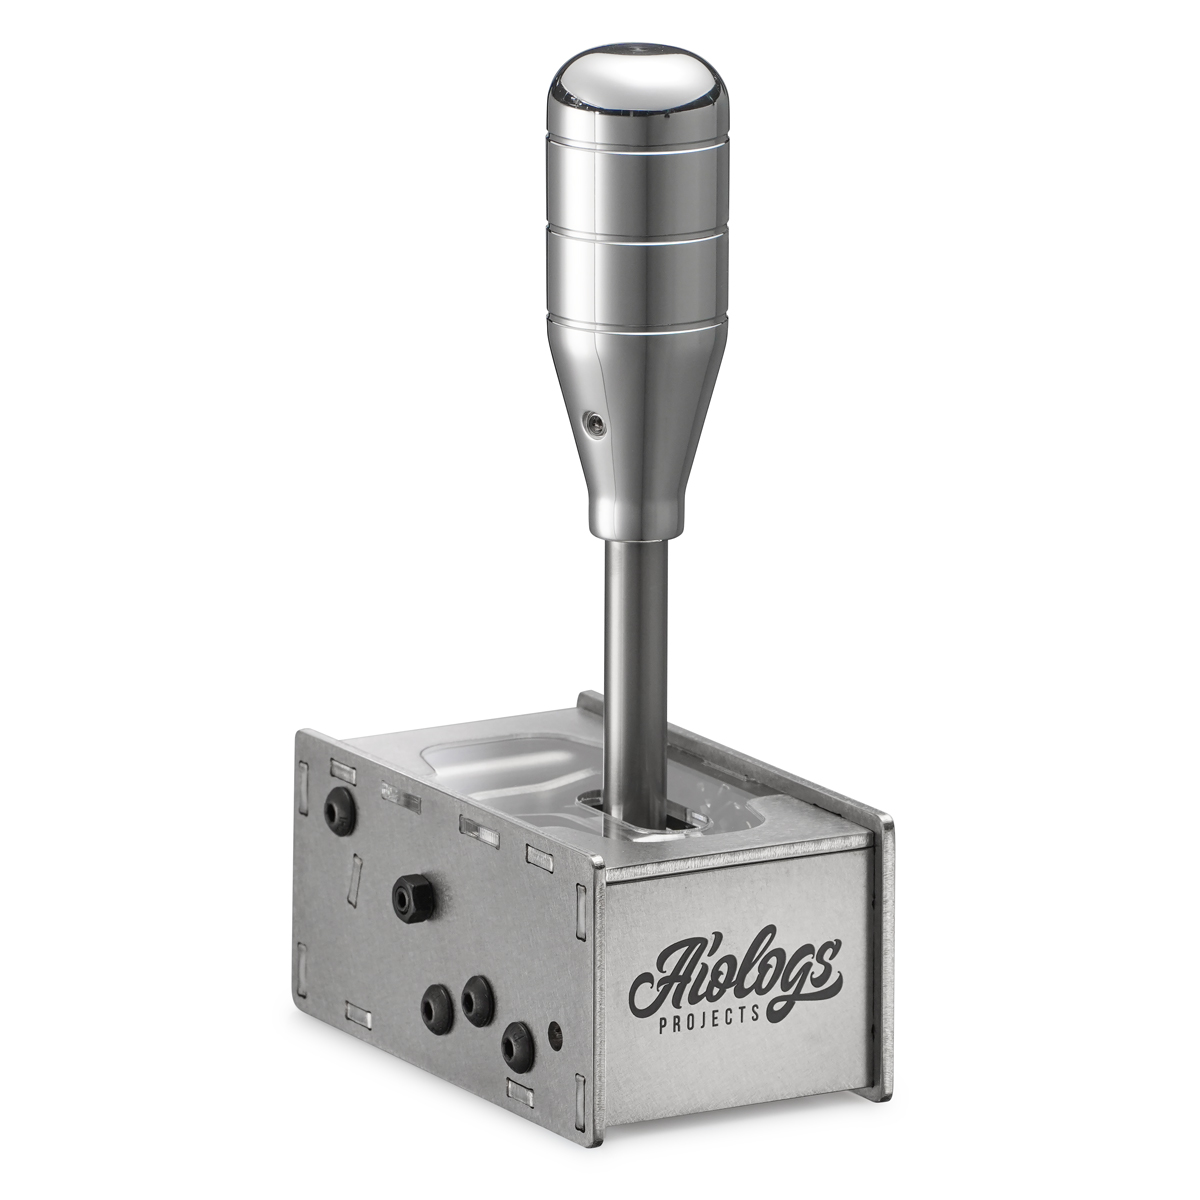 Aiologs Shifter Sequential